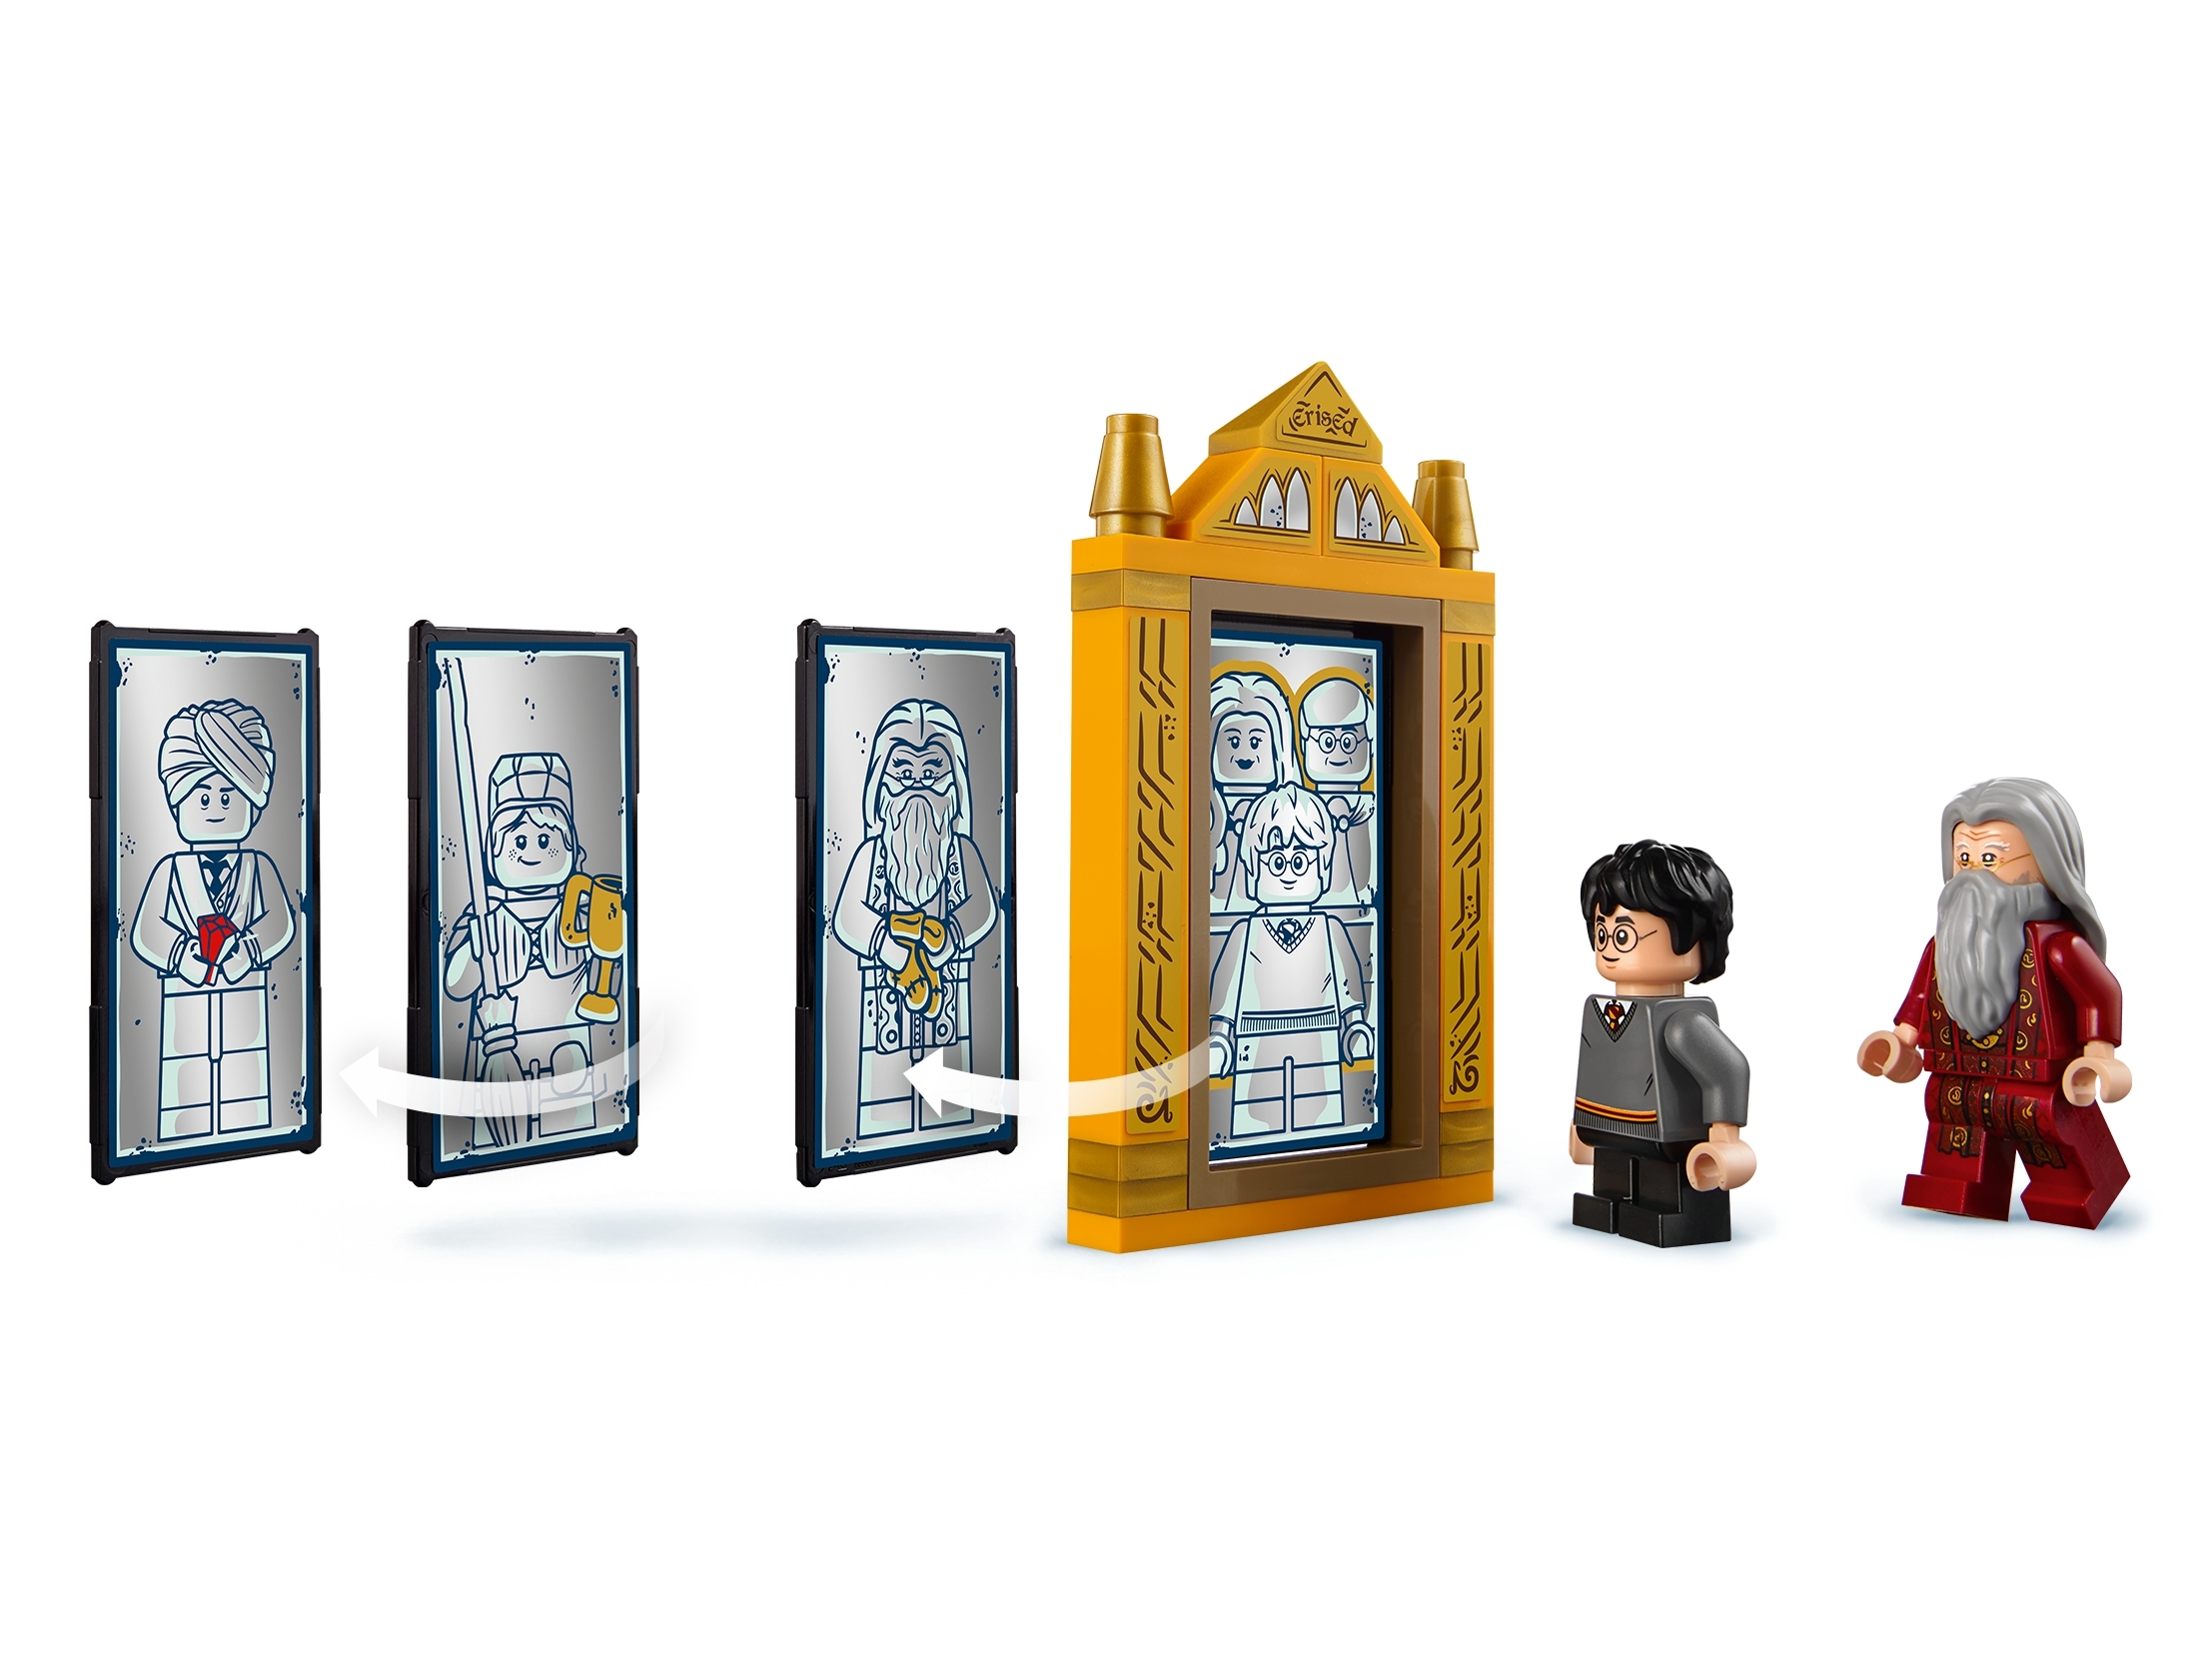 LEGO Harry Potter Harry Potter from 75954 Hogwarts Great Hall 